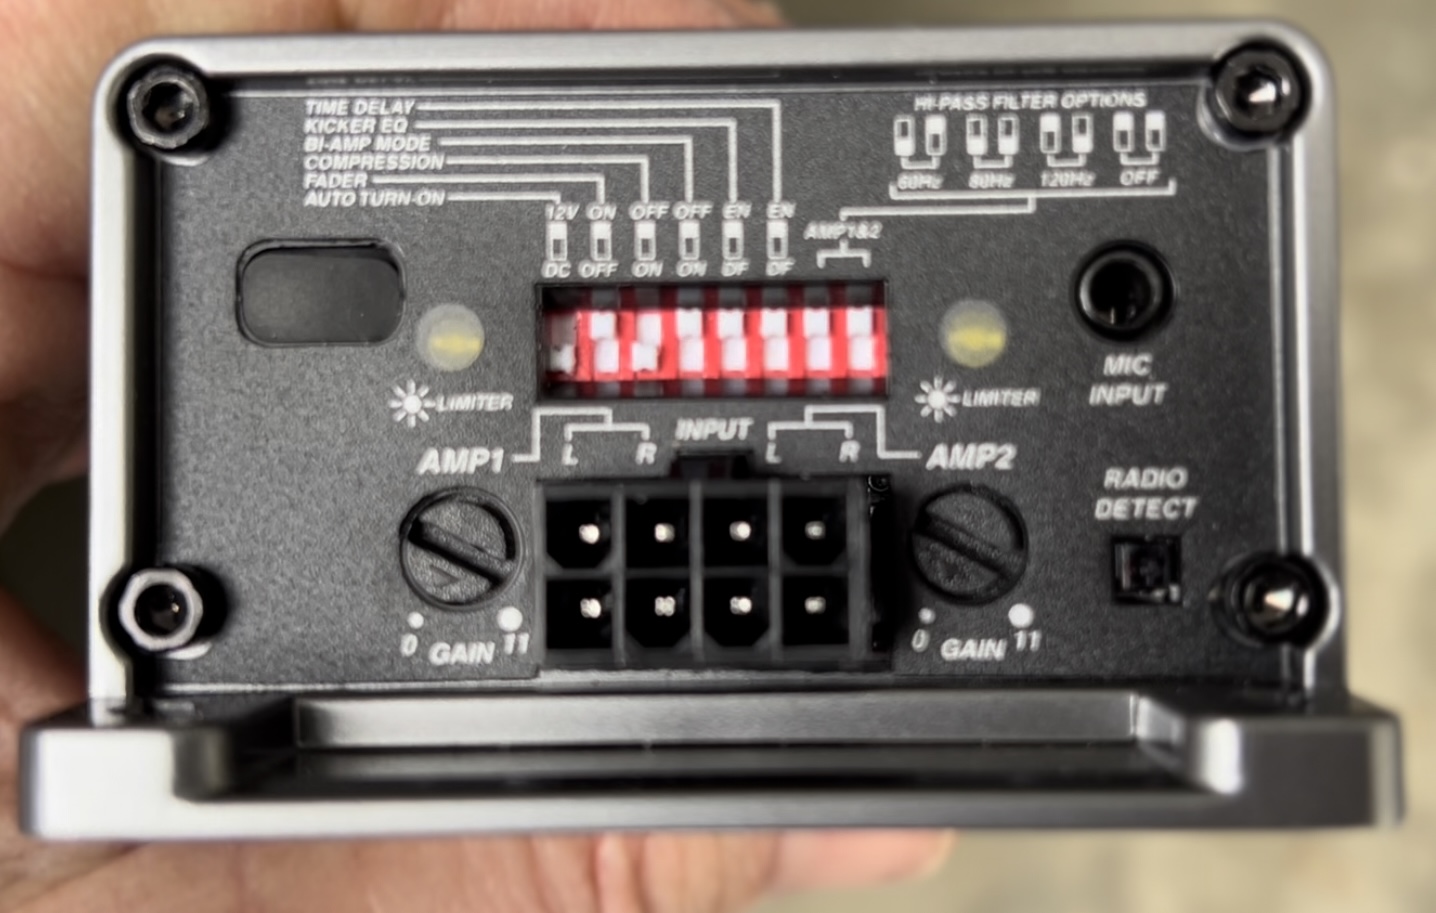 Ford Bronco Kicker Key Amp 200.4 Install DIY Video - Do this first! IMG_1347